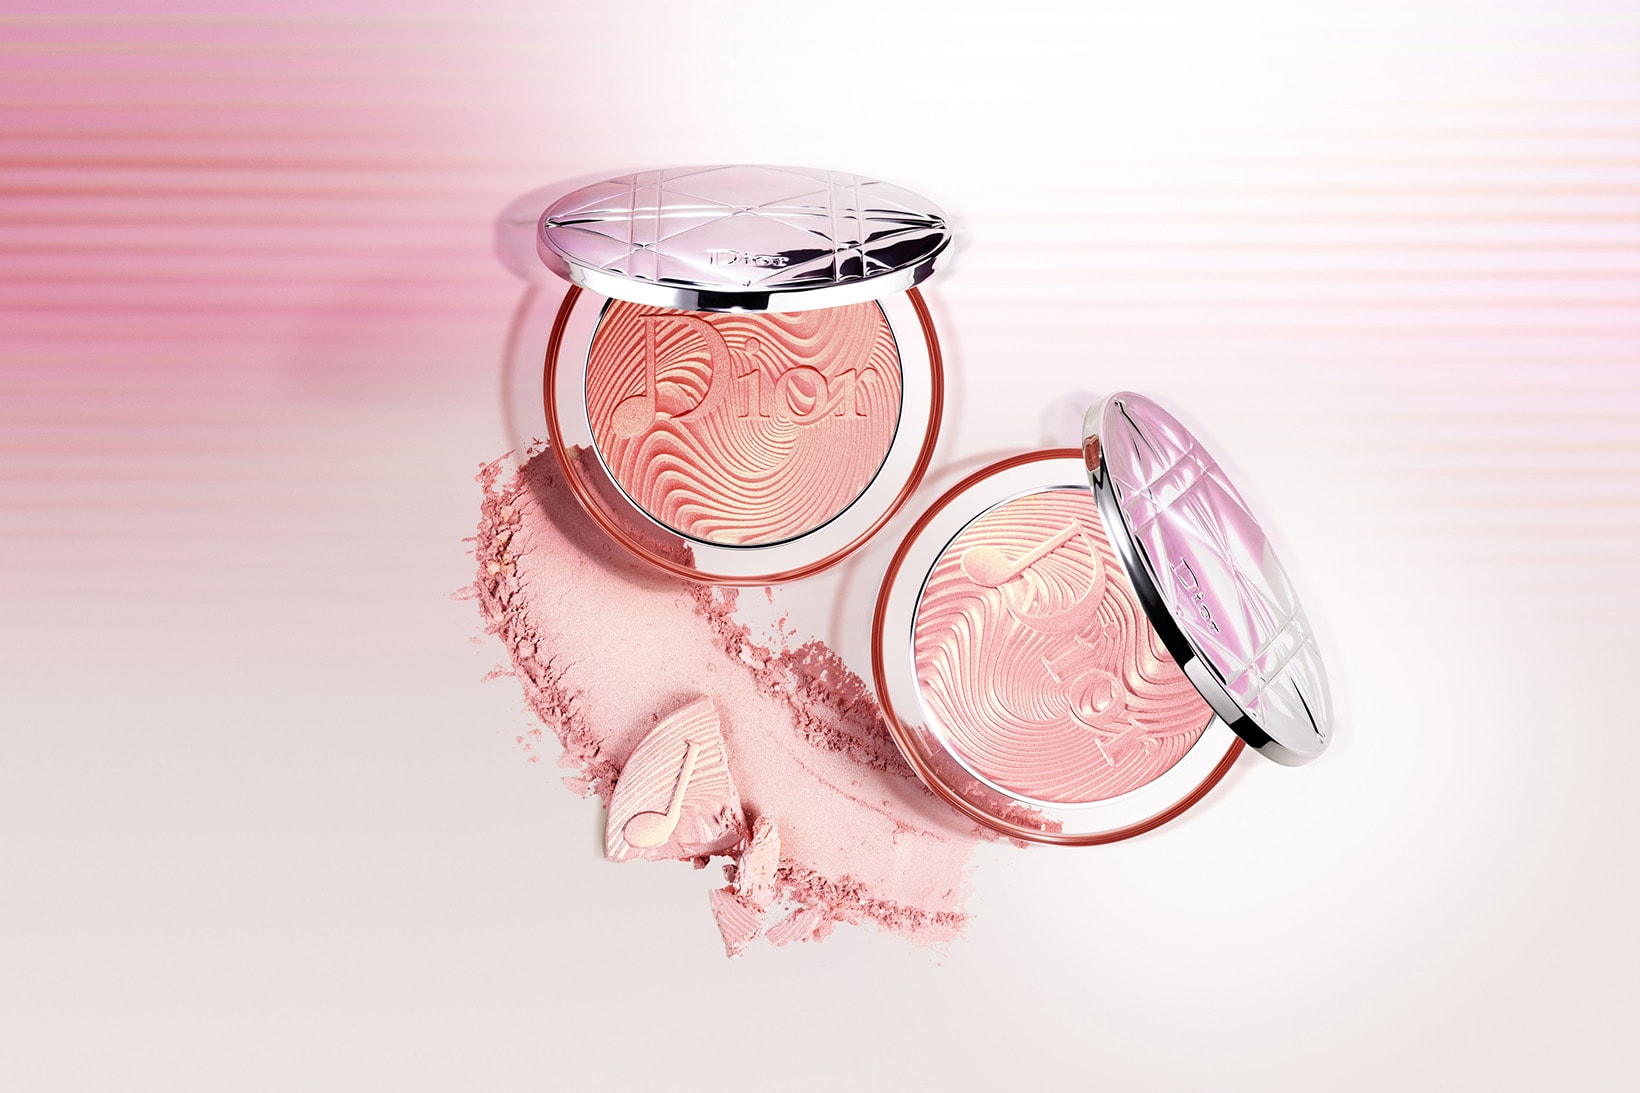 Dior Beauty "Glow Vibes" Spring Summer 2020 Makeup Collection Diorskin Luminizer Highlighter Rosy Coral Vibes